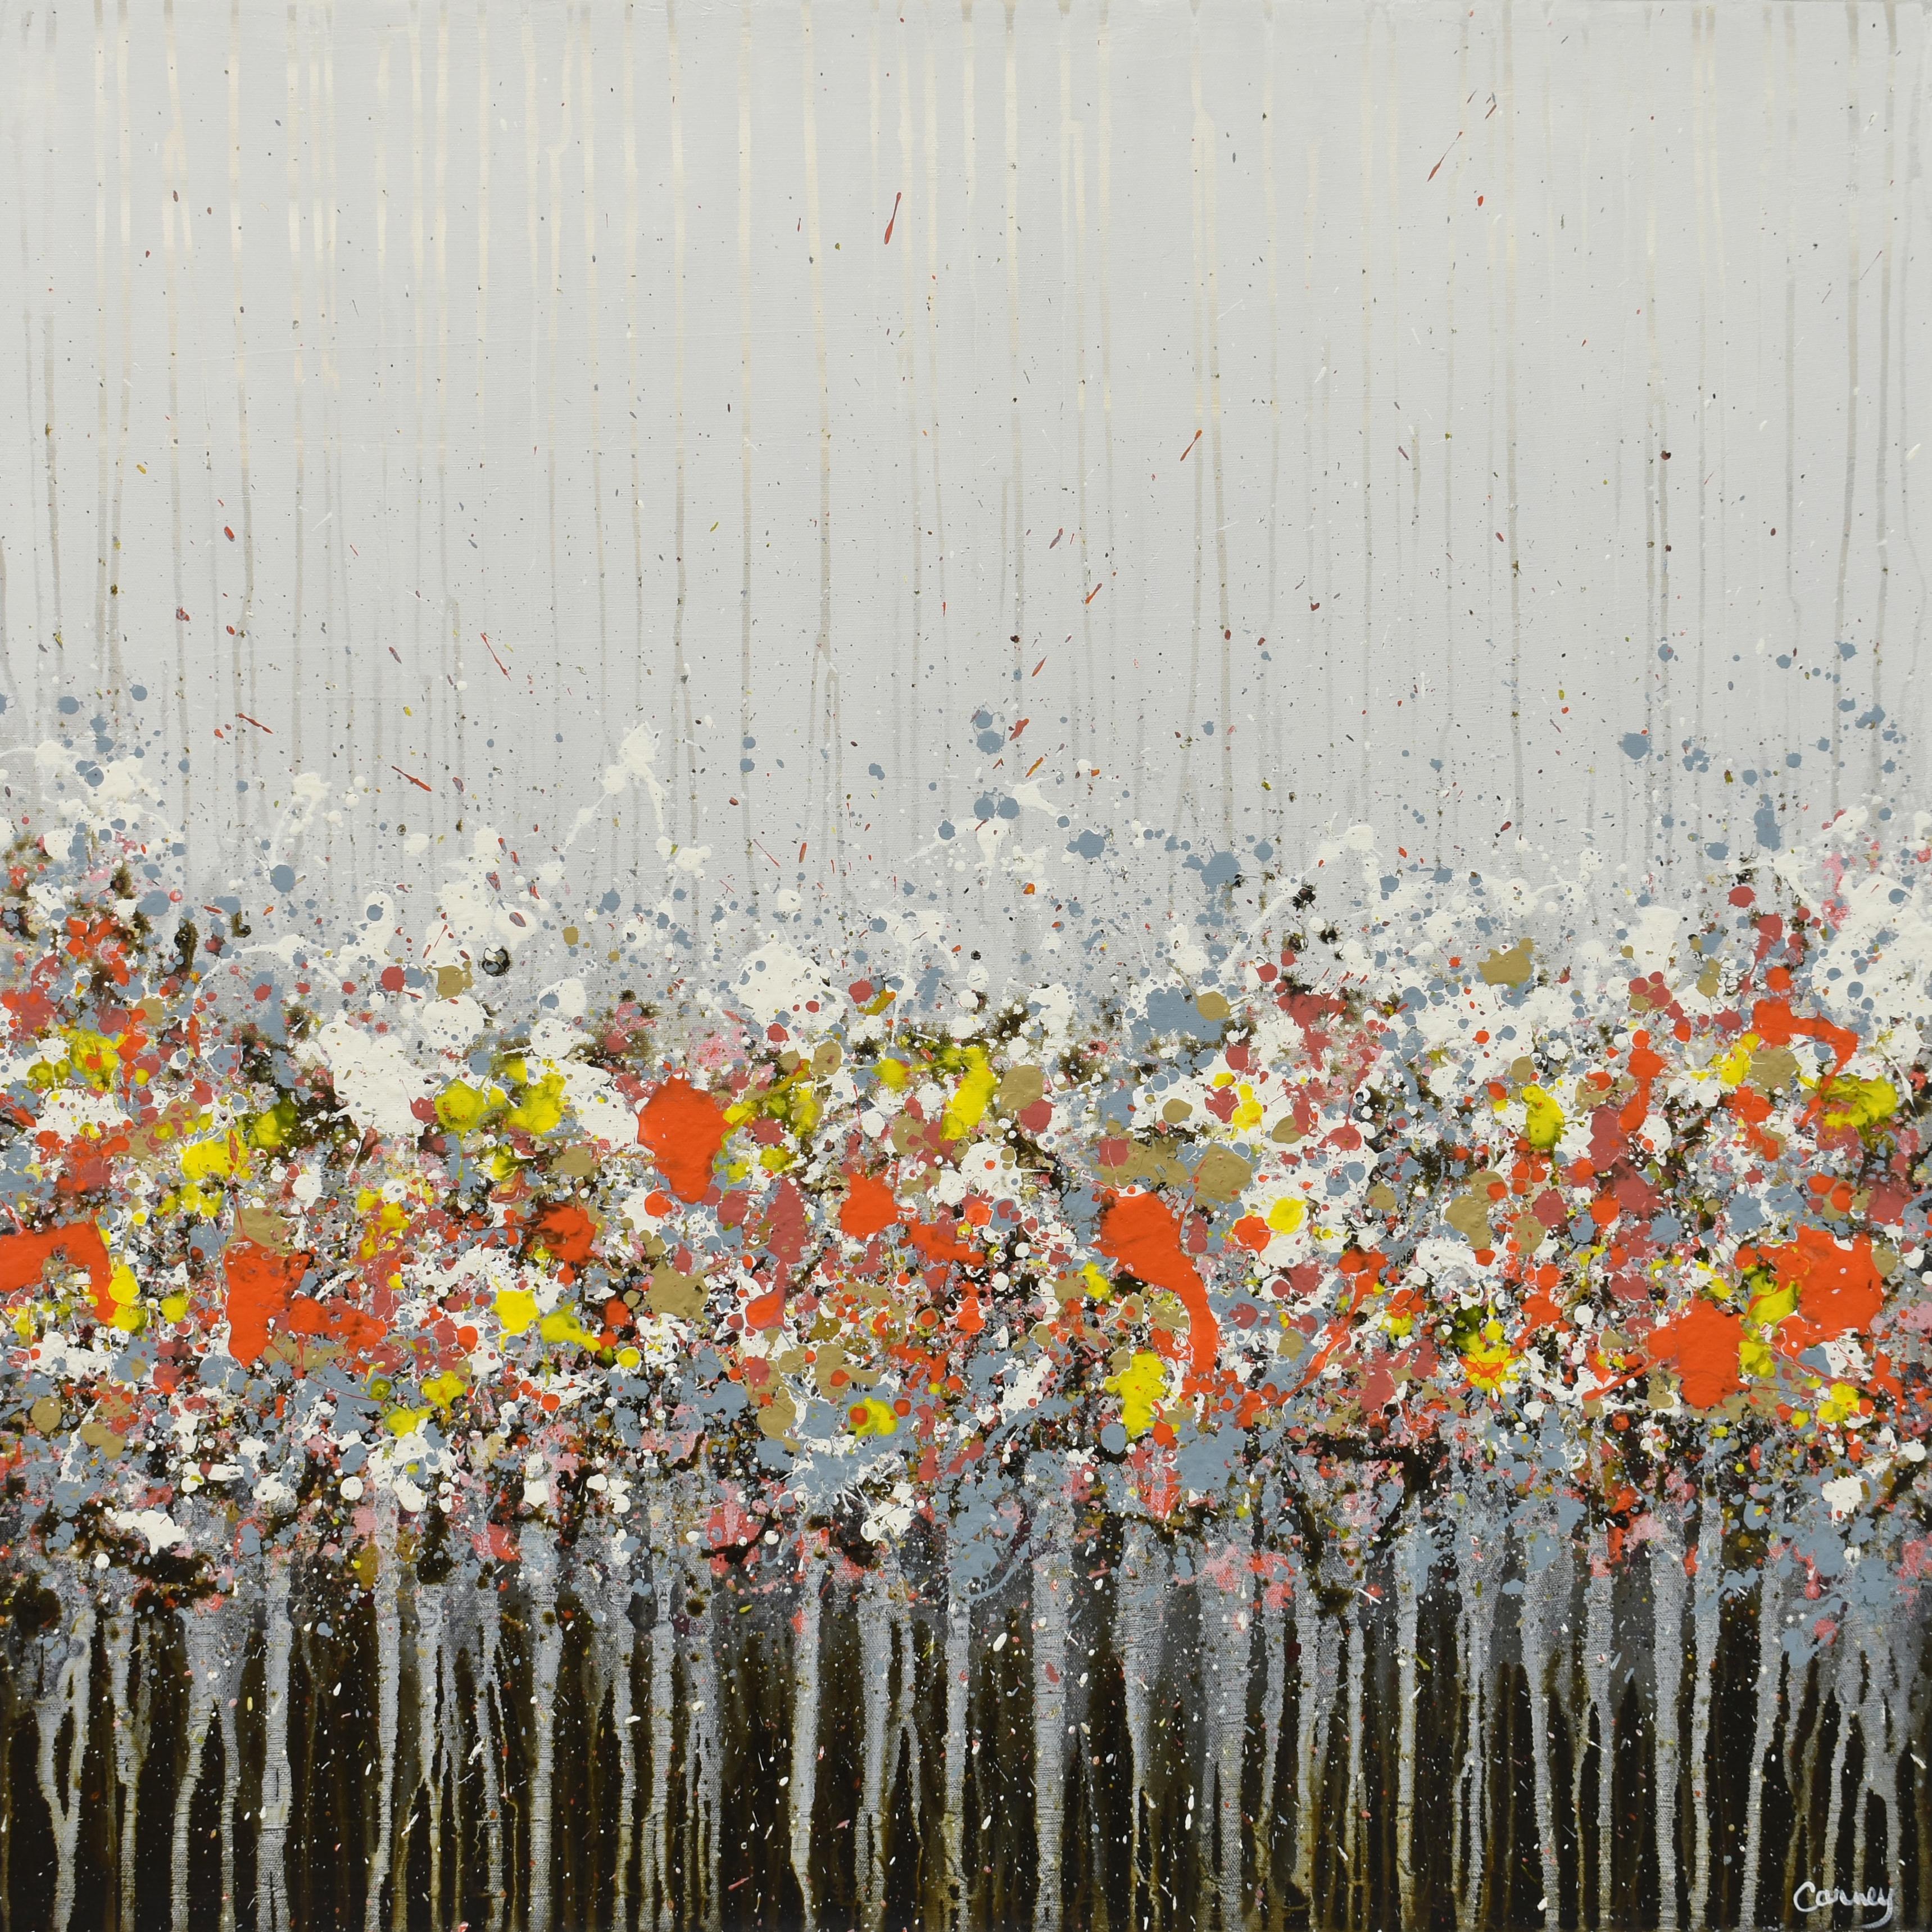 <p>Artist Comments<br>Splash and drips of paint represent nature in this abstract floral landscape. It features neutral colors of taupe, white, and yellow, with pops of red. The artwork is part of artist Lisa Carney's GeoFlora